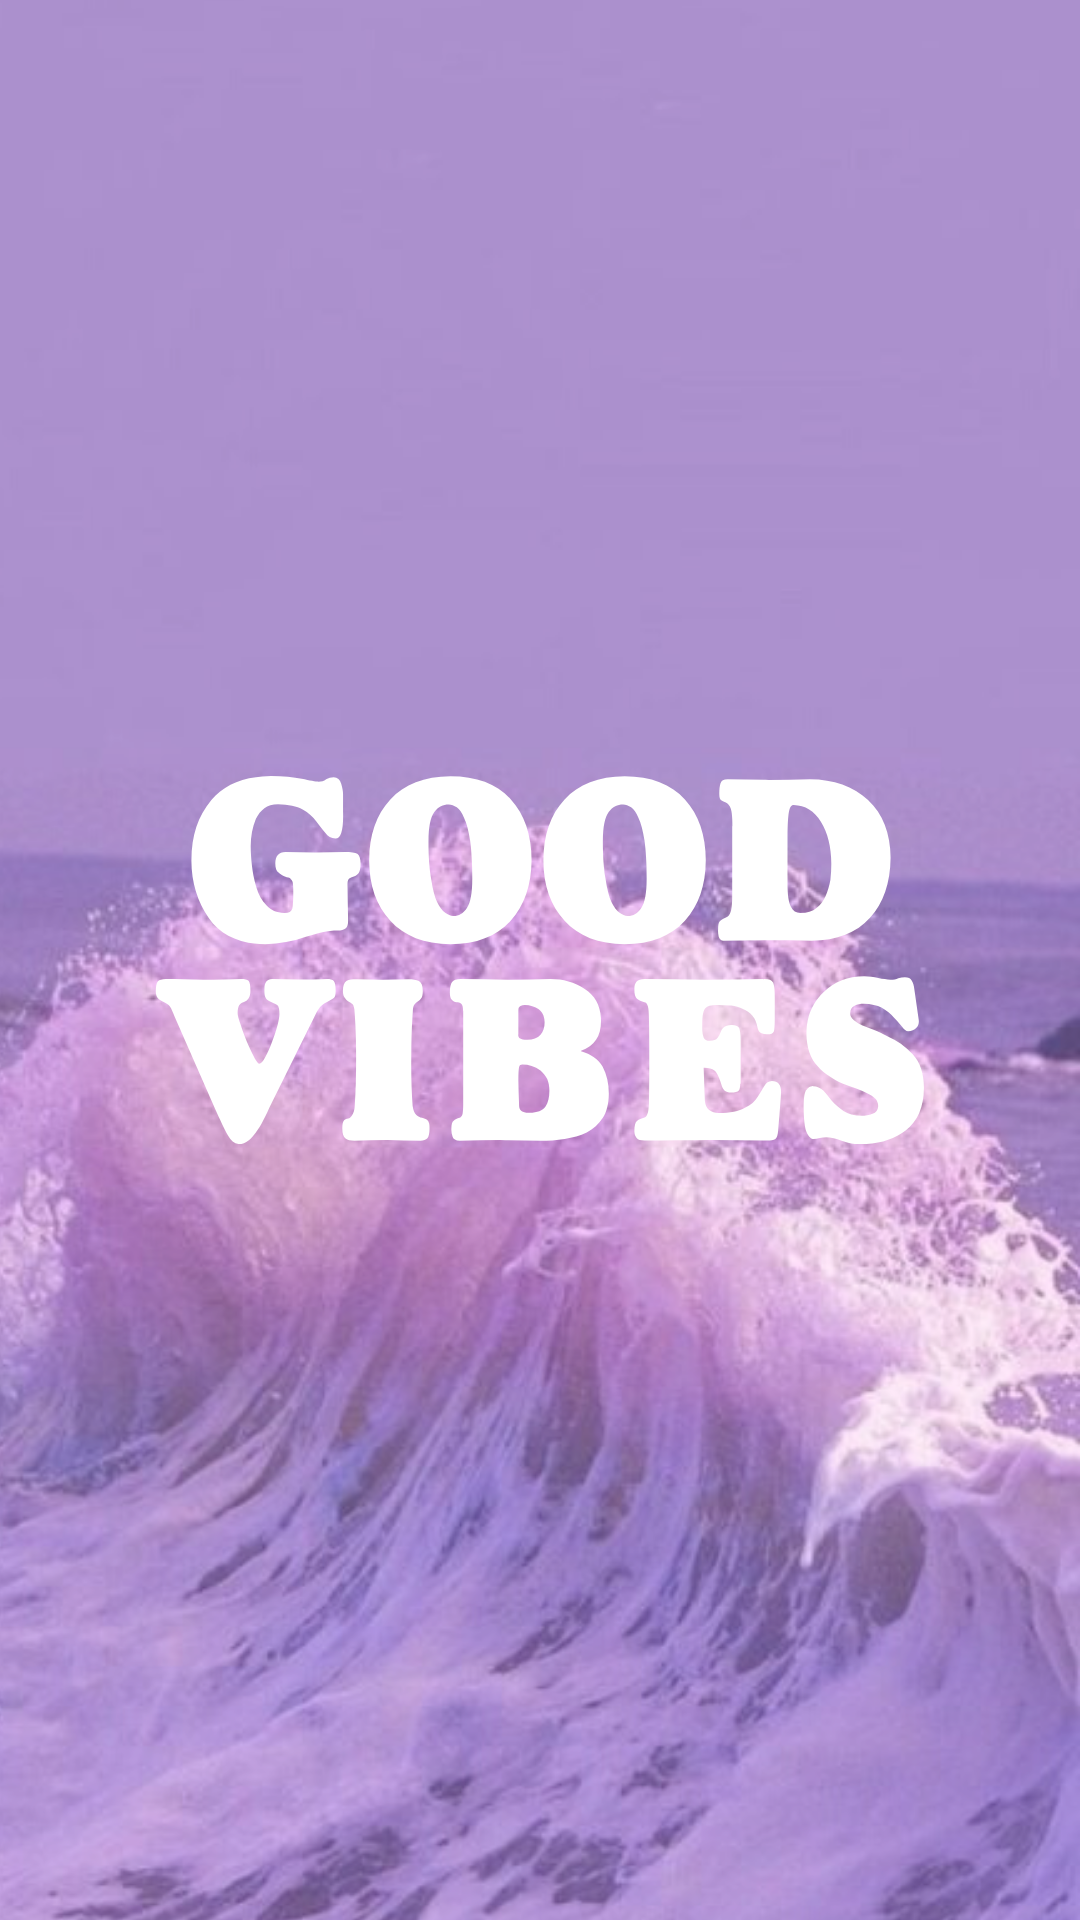 Good Vibes Wallpaper. Good vibes wallpaper, Good vibes quotes, Good vibes